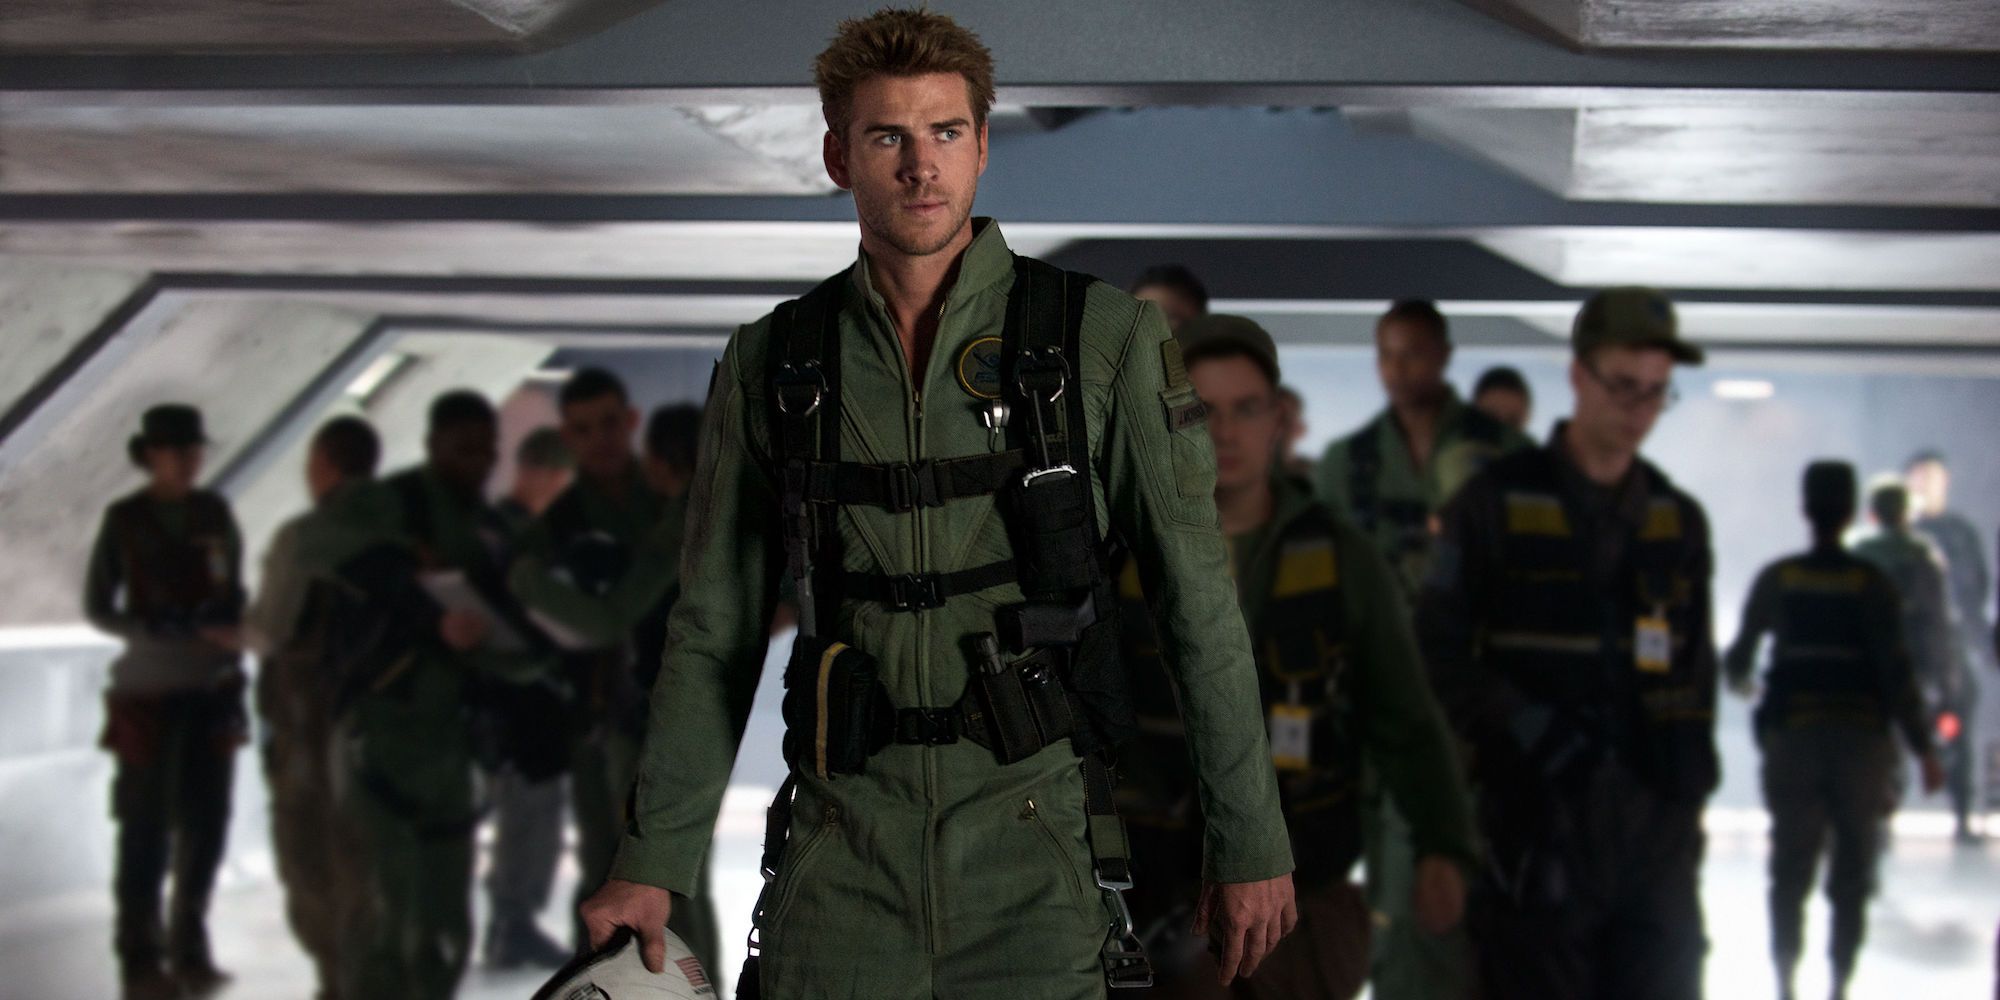 Liam Hemsworth as Jake Morrison in Independence Day: Resurgence